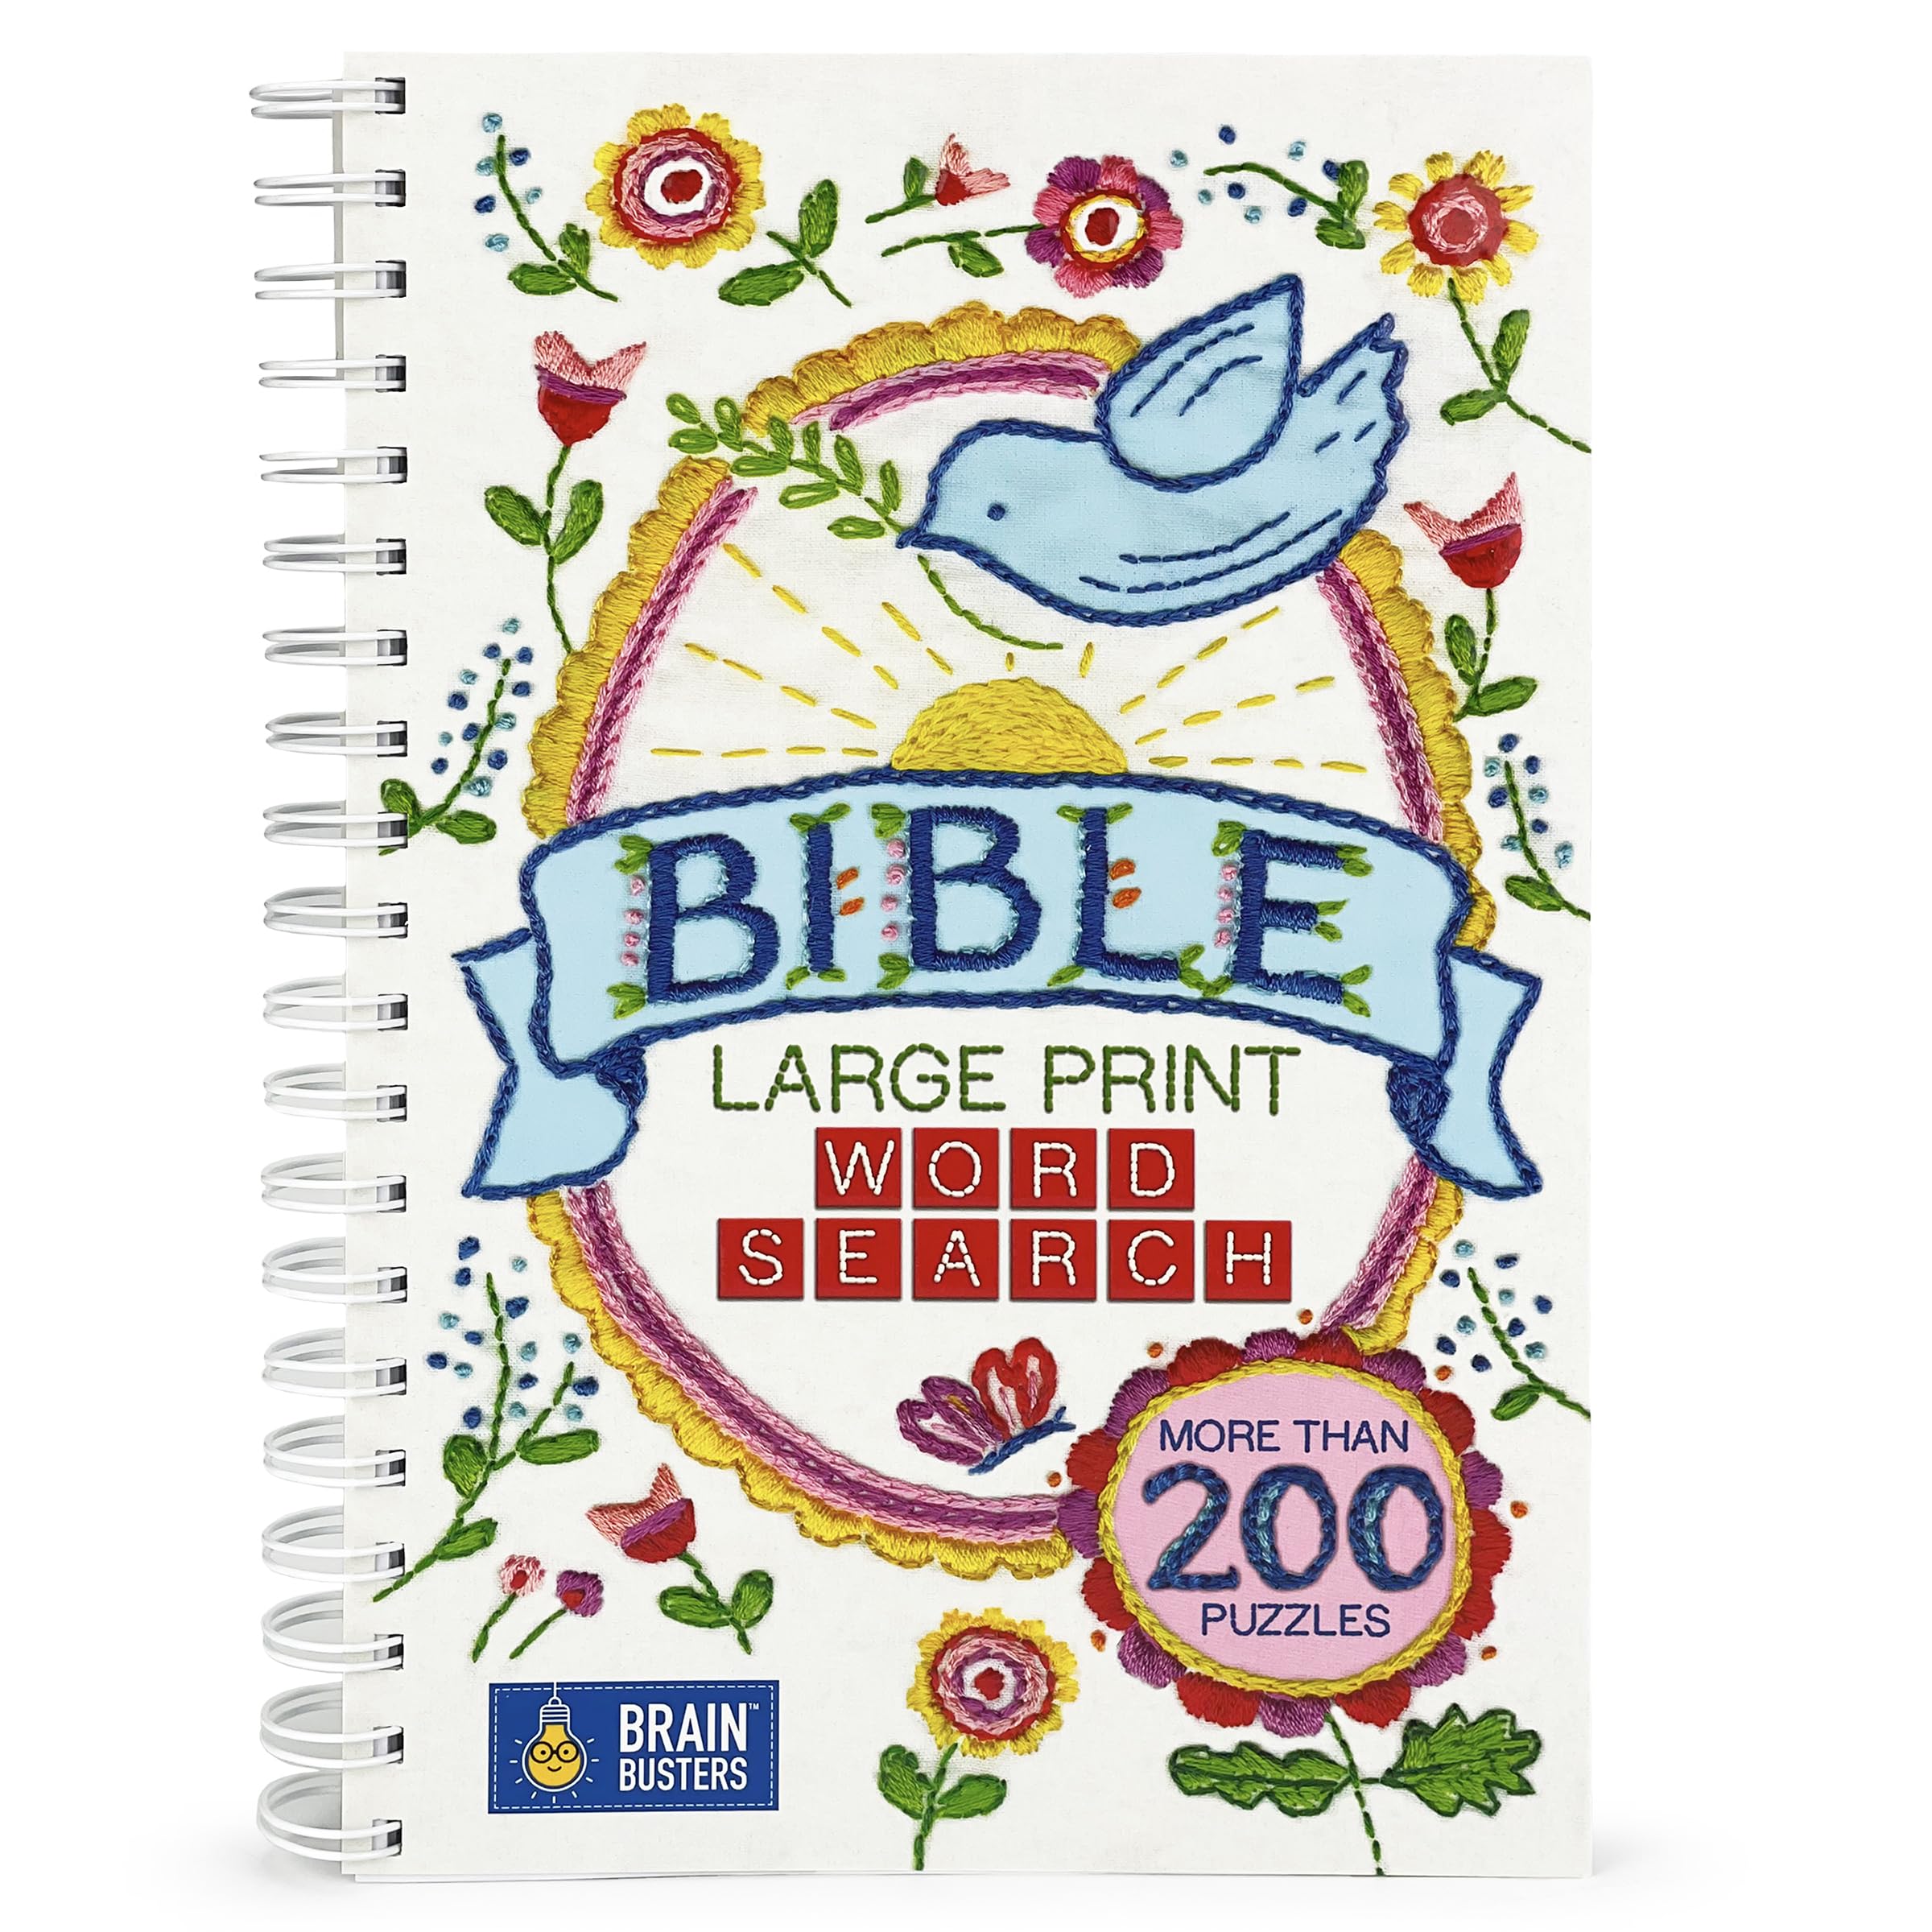 Bible Large Print Word Search by Cottage Door Press